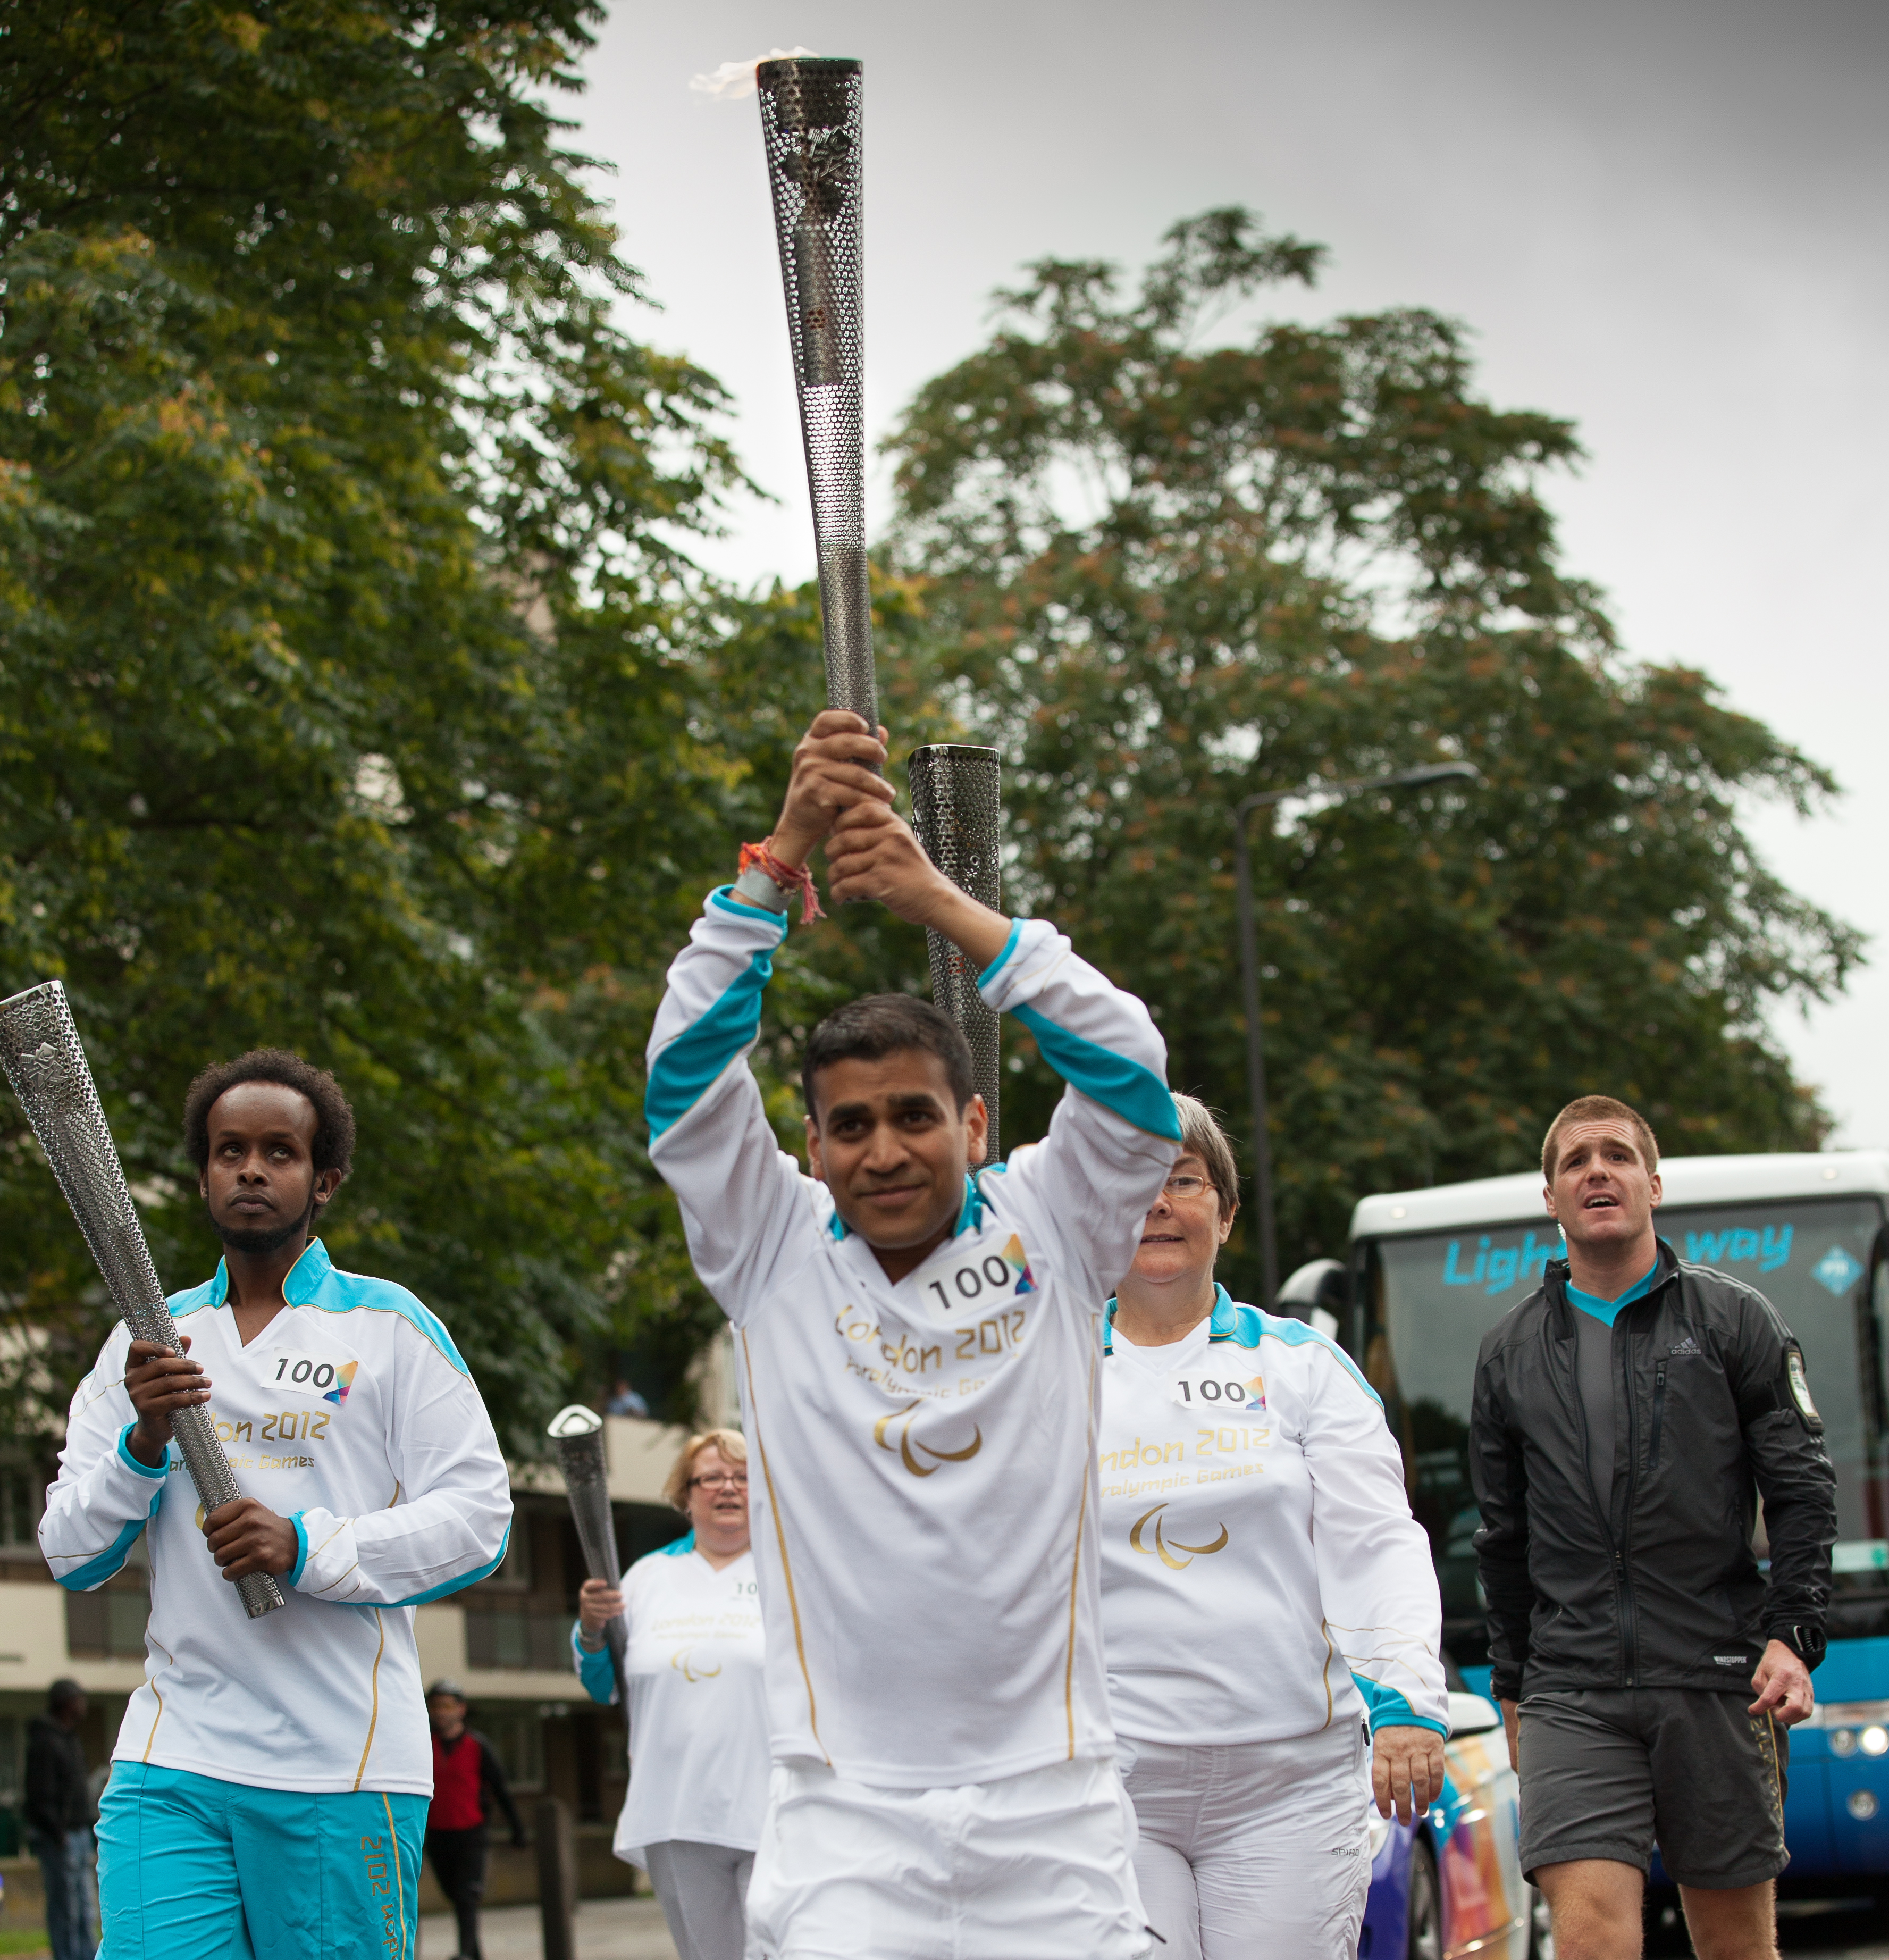 Trustee Kush pictured carrying the olympic torch